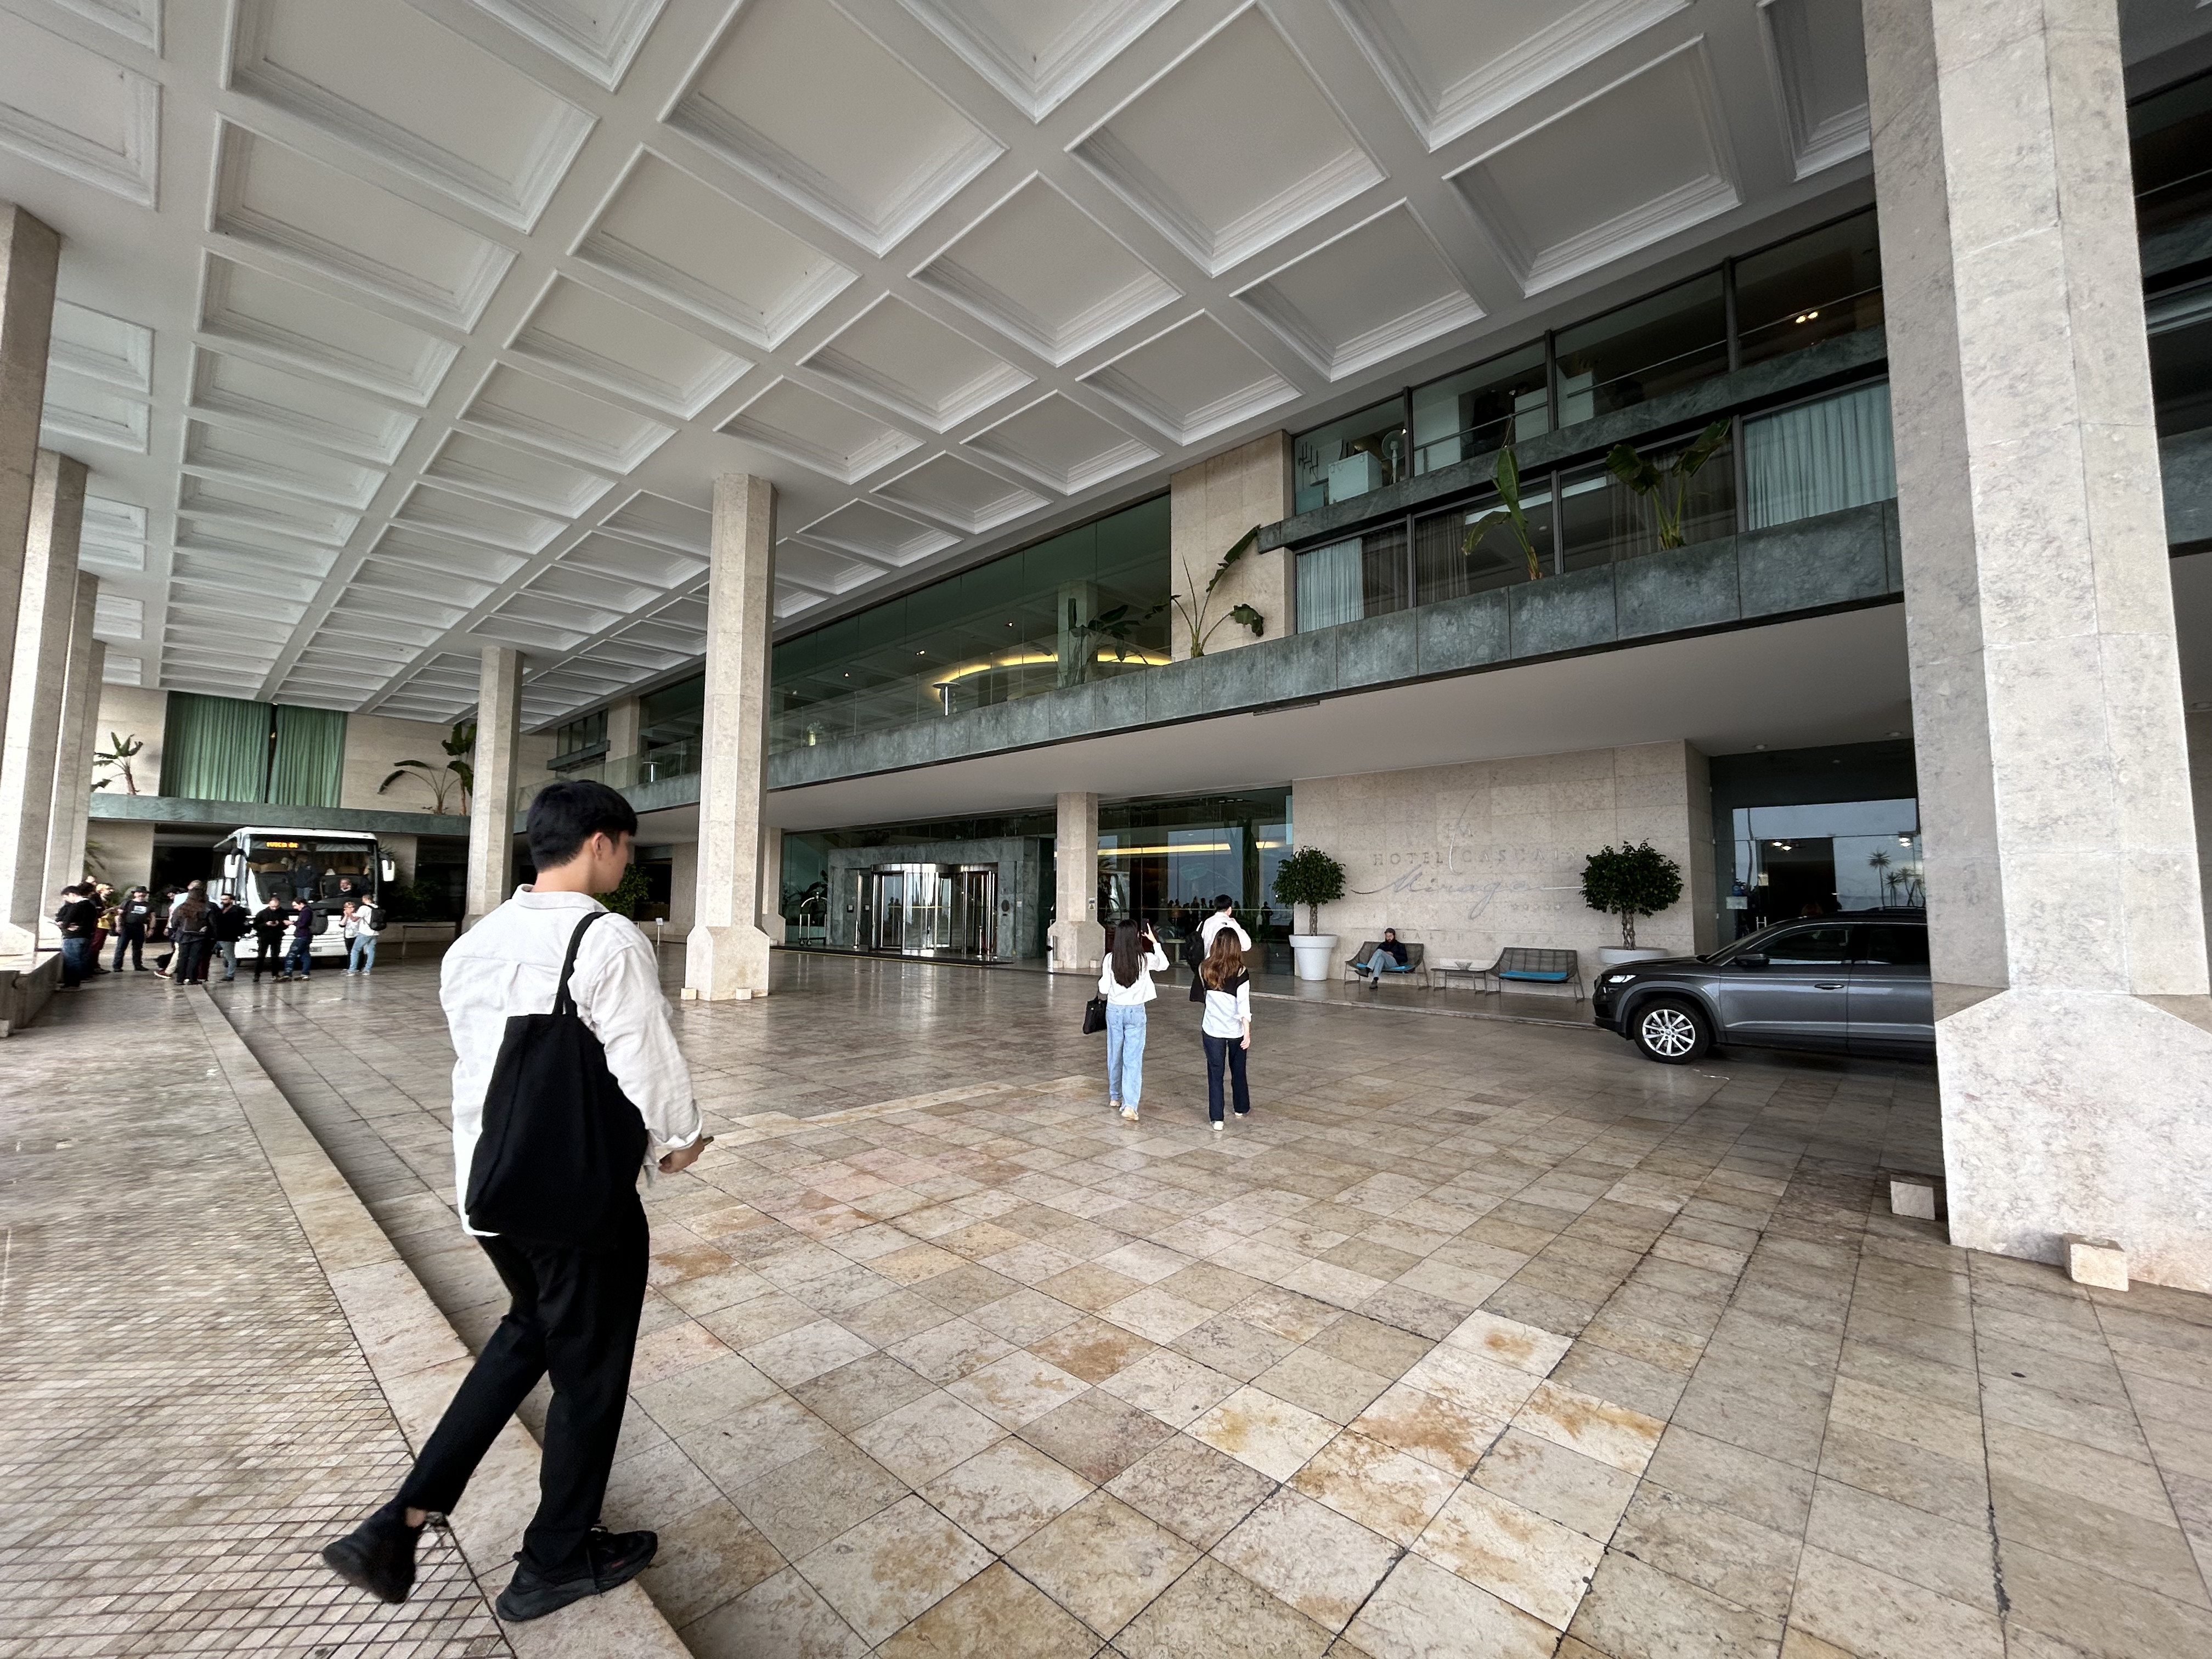 Entrance of a modern conference venue with a high ceiling supported by square columns. People are scattered around the space, some walking and others standing in groups, chatting. A man in a white shirt and black trousers walks across the foreground, while a car is parked by the curb, and the interior of the building is visible through the glass facade in the background.